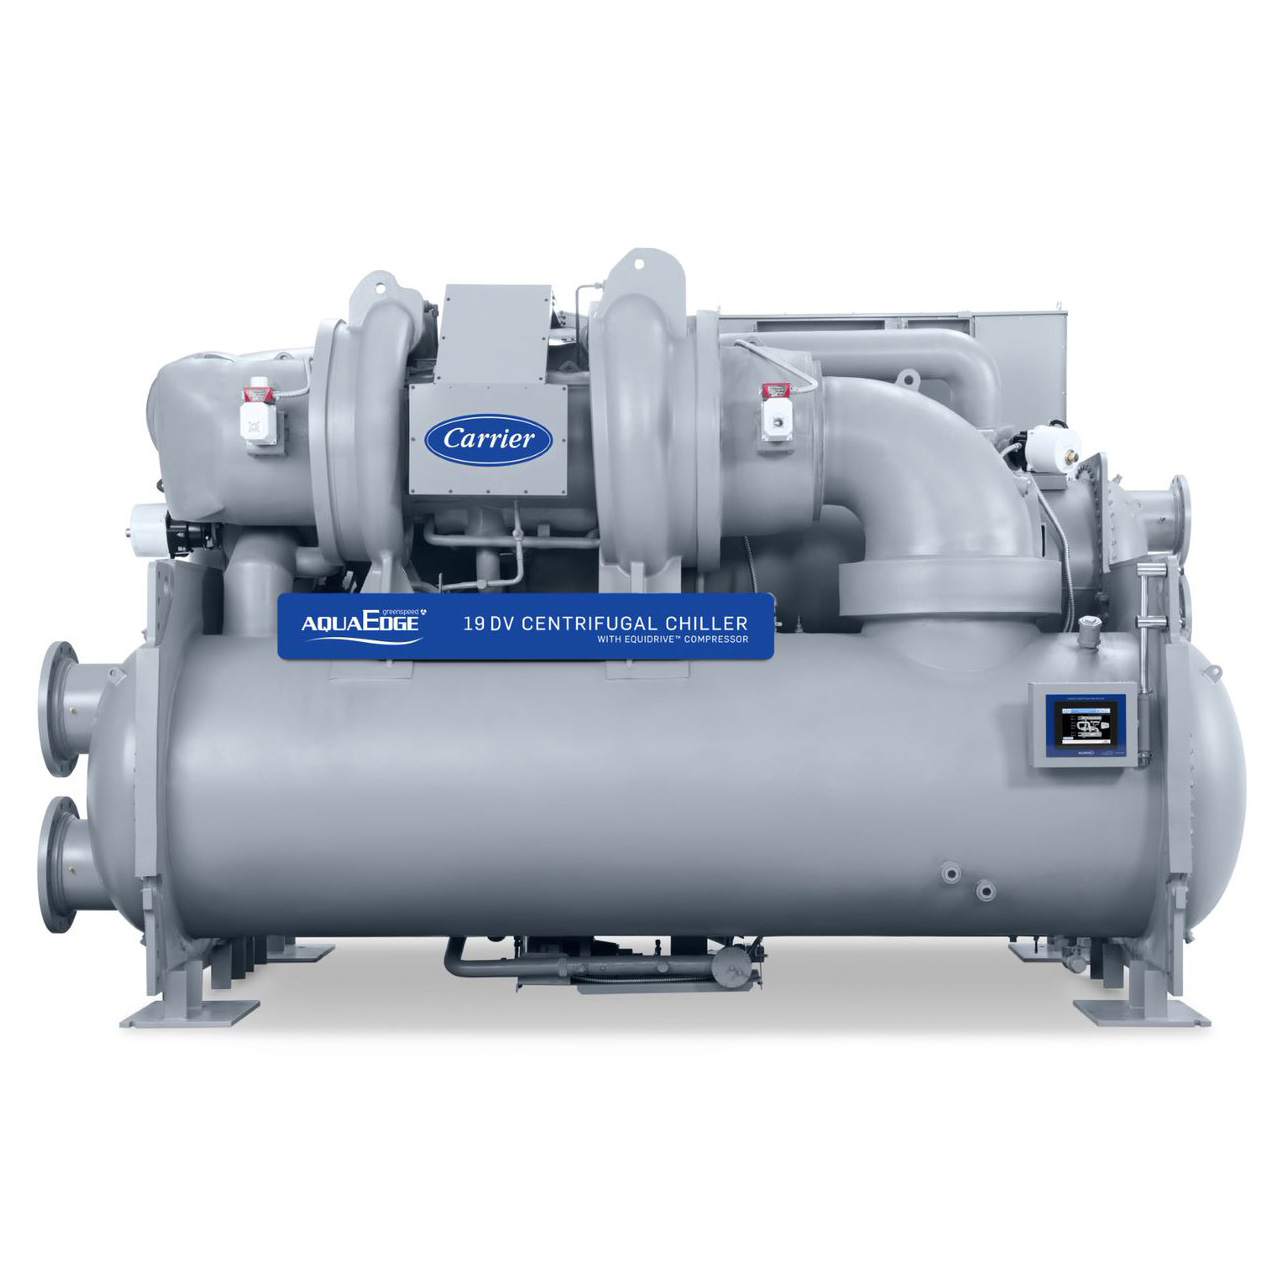 The AquaEdge® 19DV Water-Cooled Centrifugal Chiller is the Ultimate Innovation in Heating and Cooling Technology.